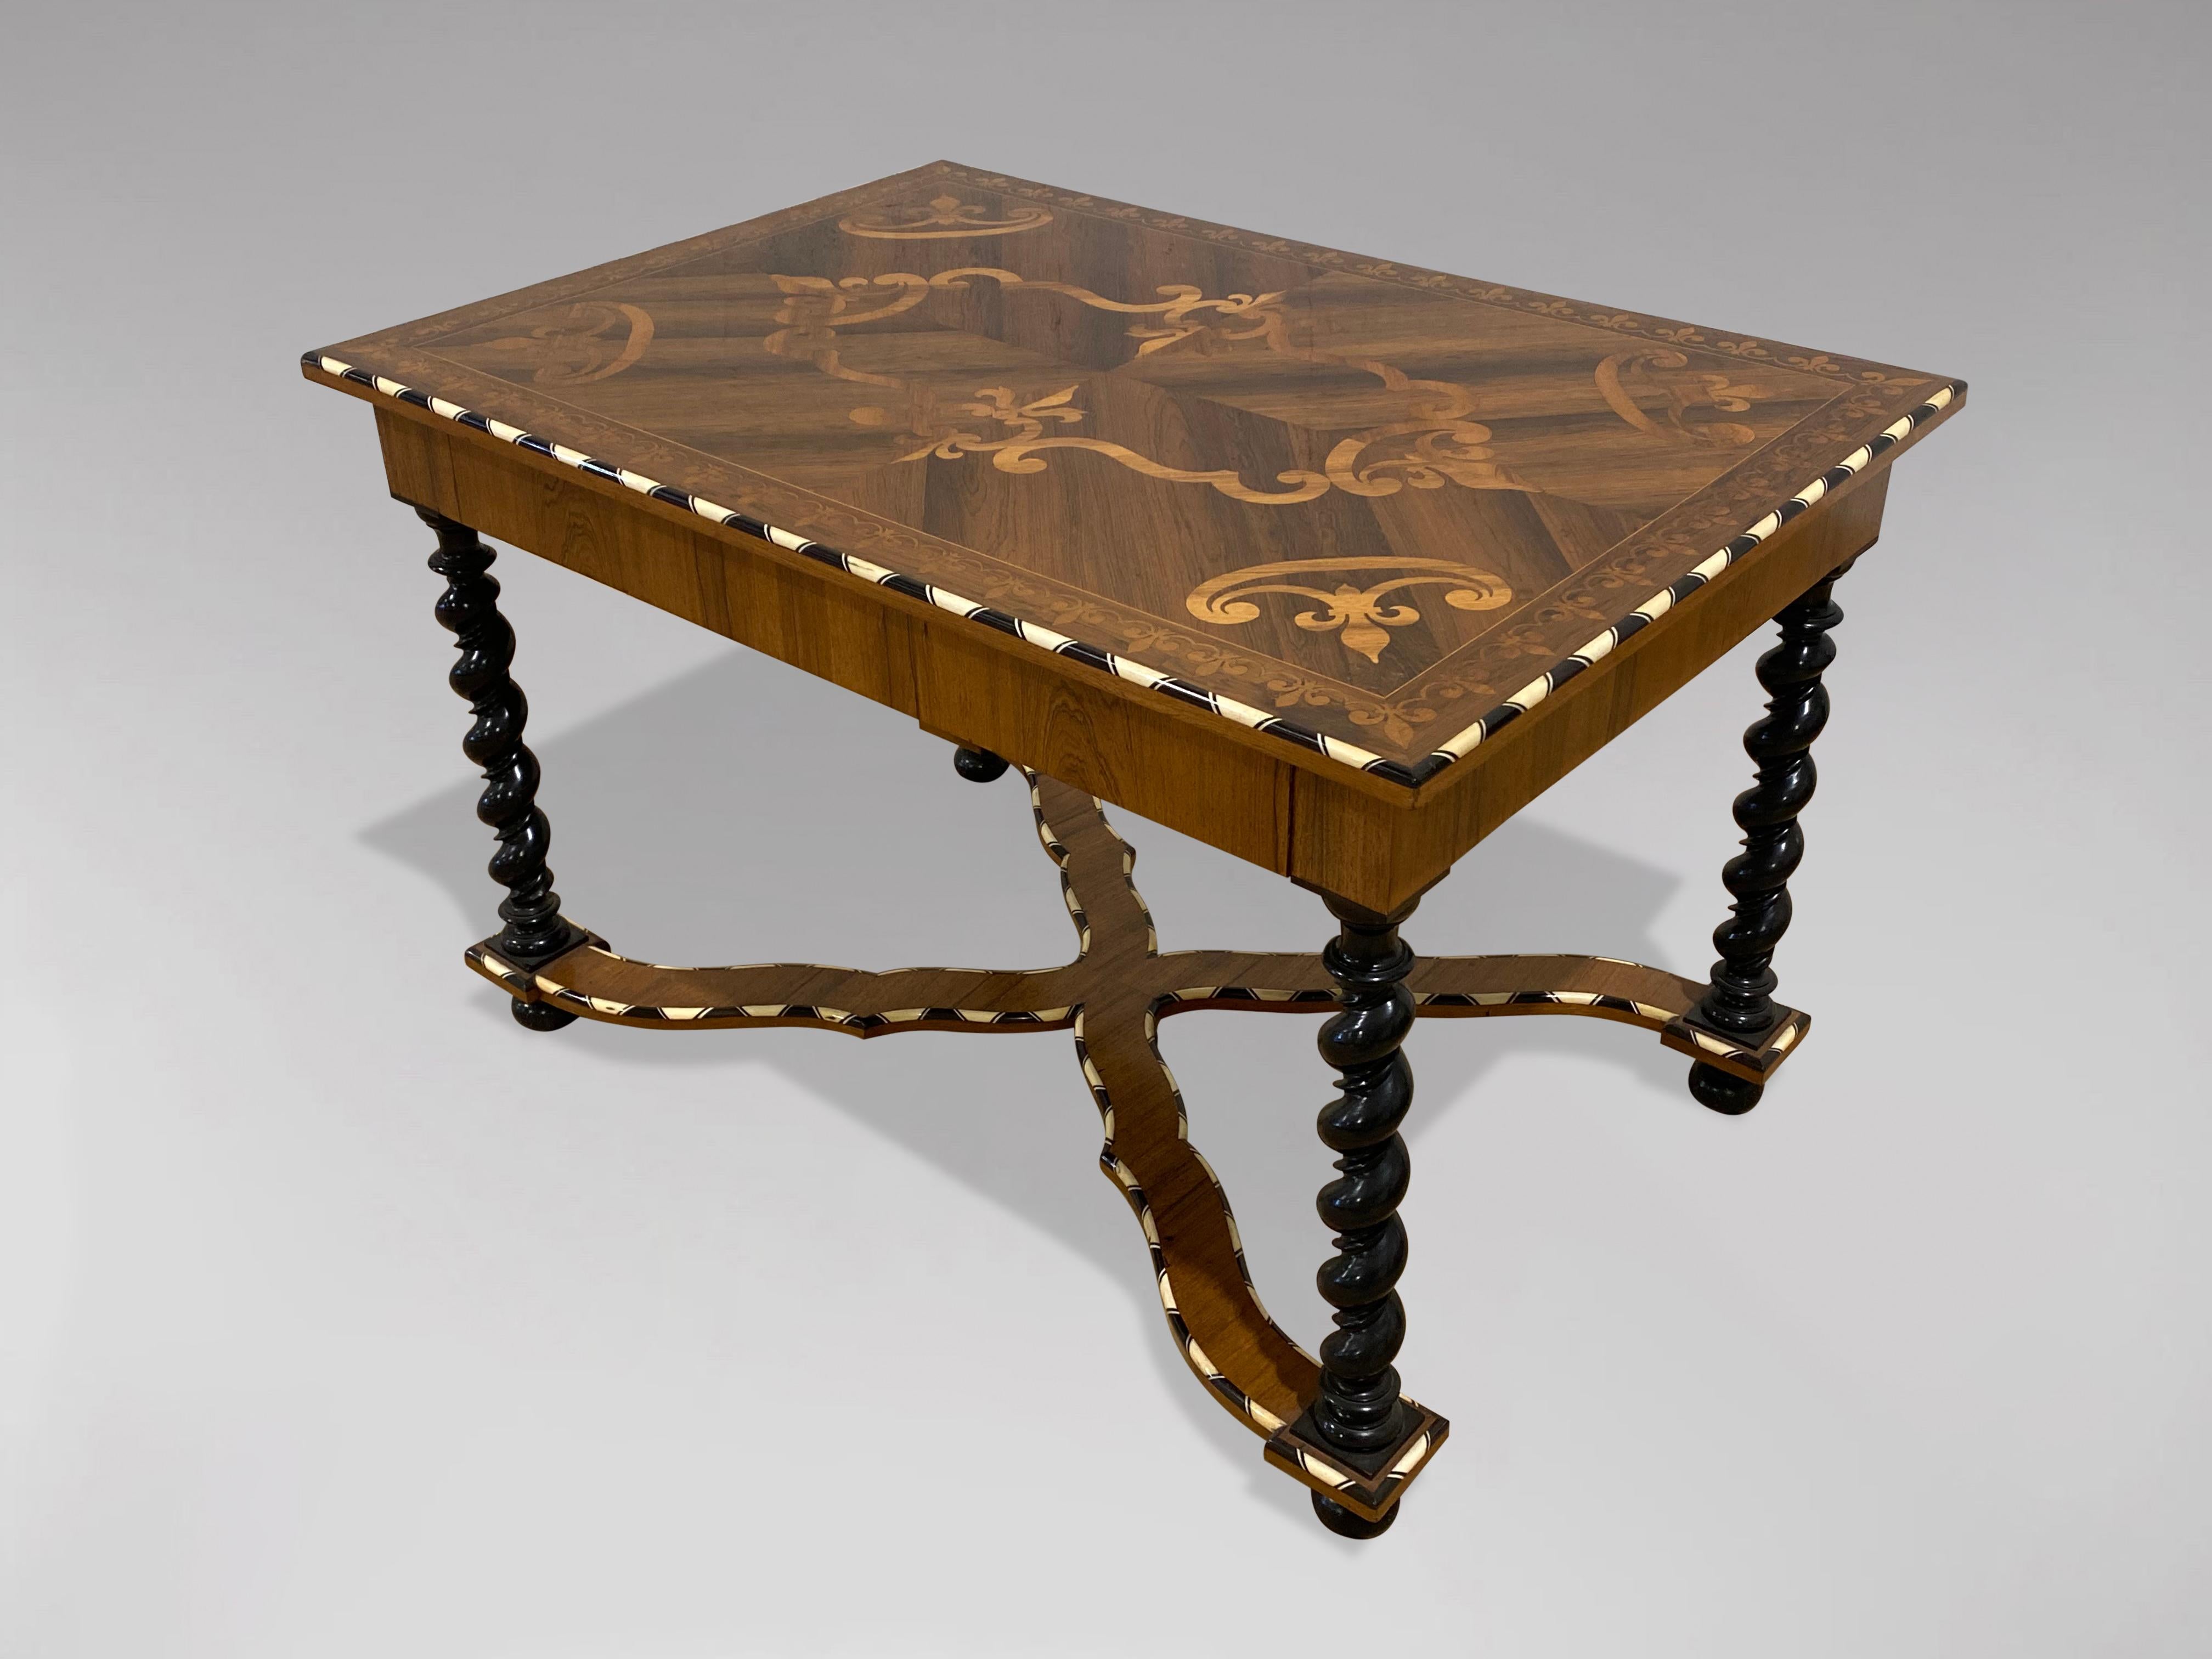 A stunning early 20th century Dutch rosewood marquetry single drawer centre table or writing table. The rectangular top with bone and ebony inlaid edge and profusely inlaid with trailing foliate and fleurs de lys motifs, above a fitted single long